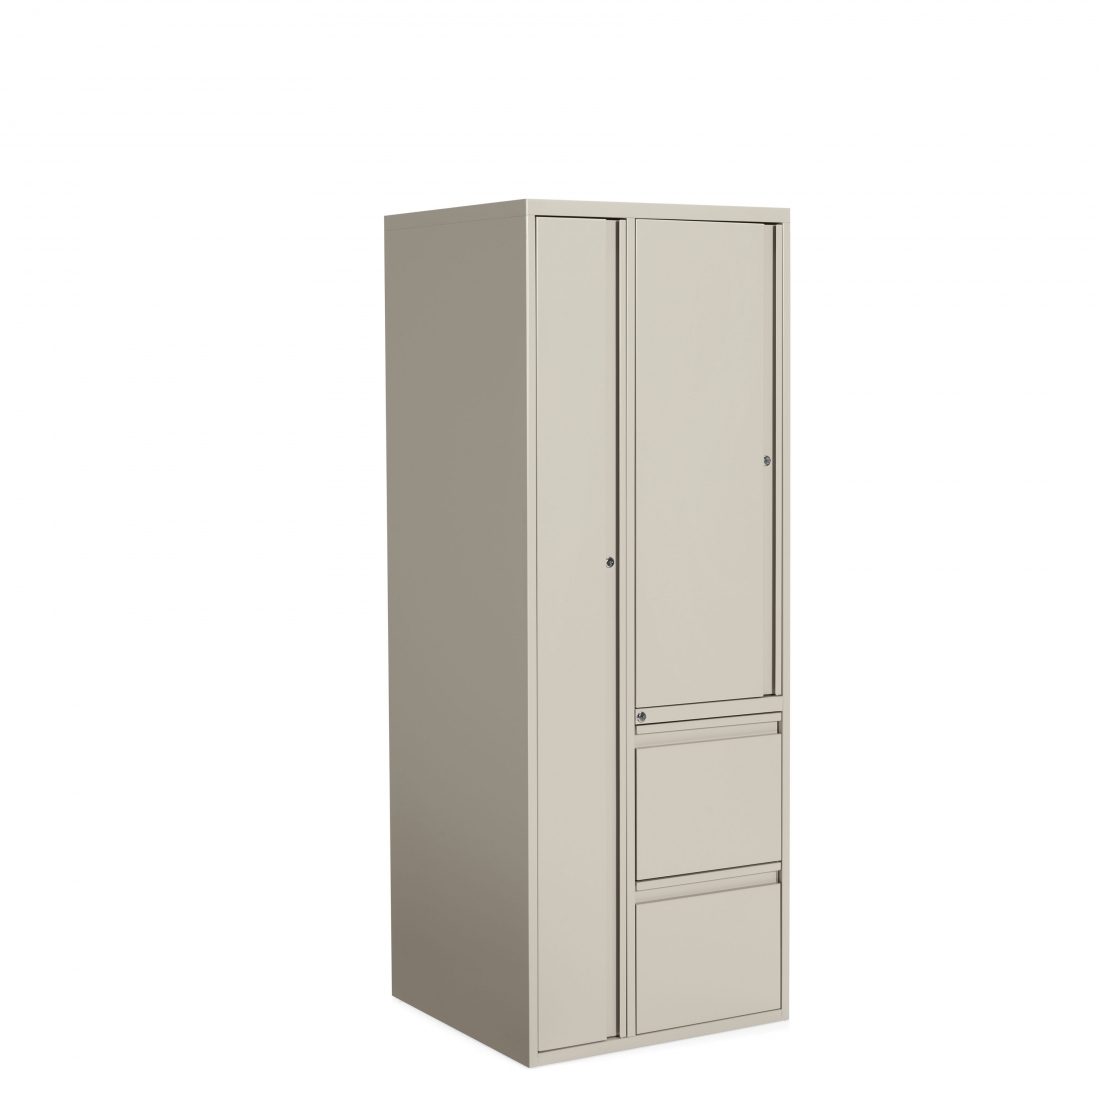 Personal Tower, Wardrobe - Left, Two File - Right